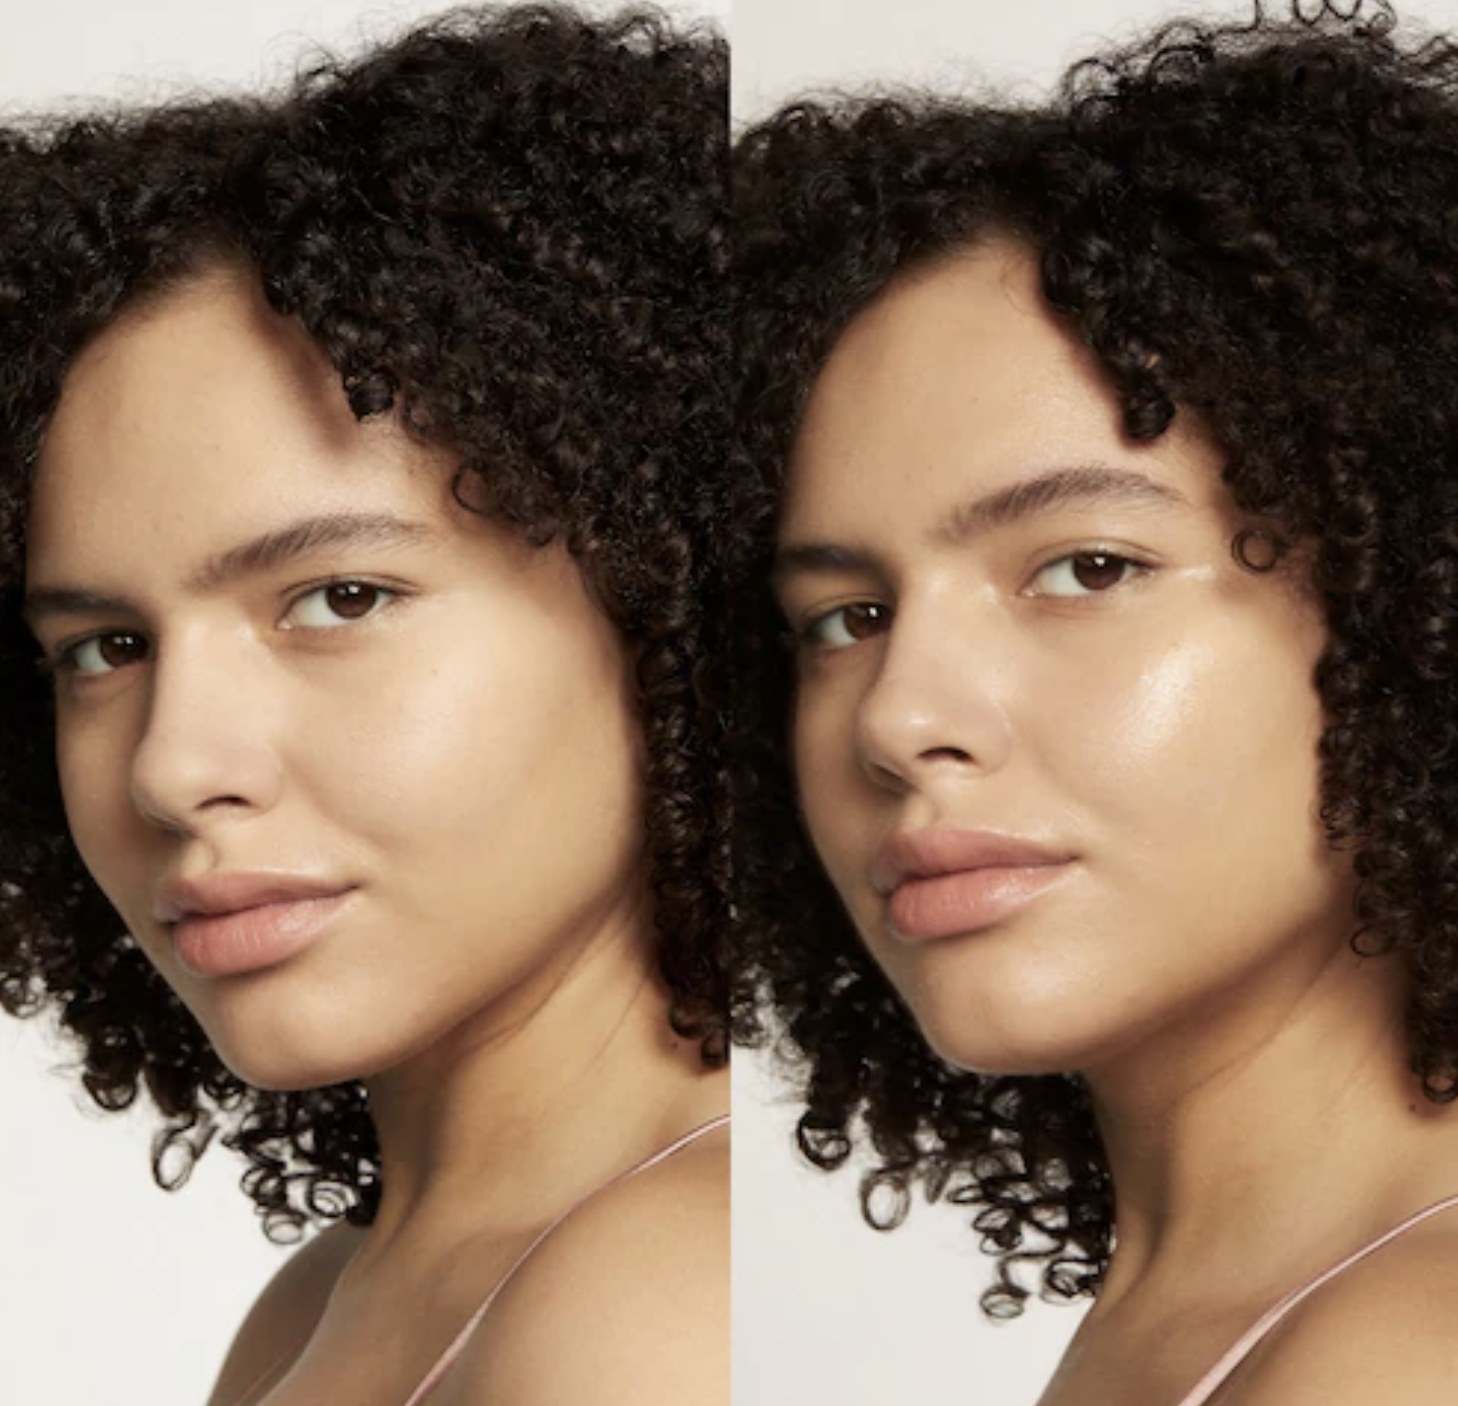 a model before and after using the dew drops